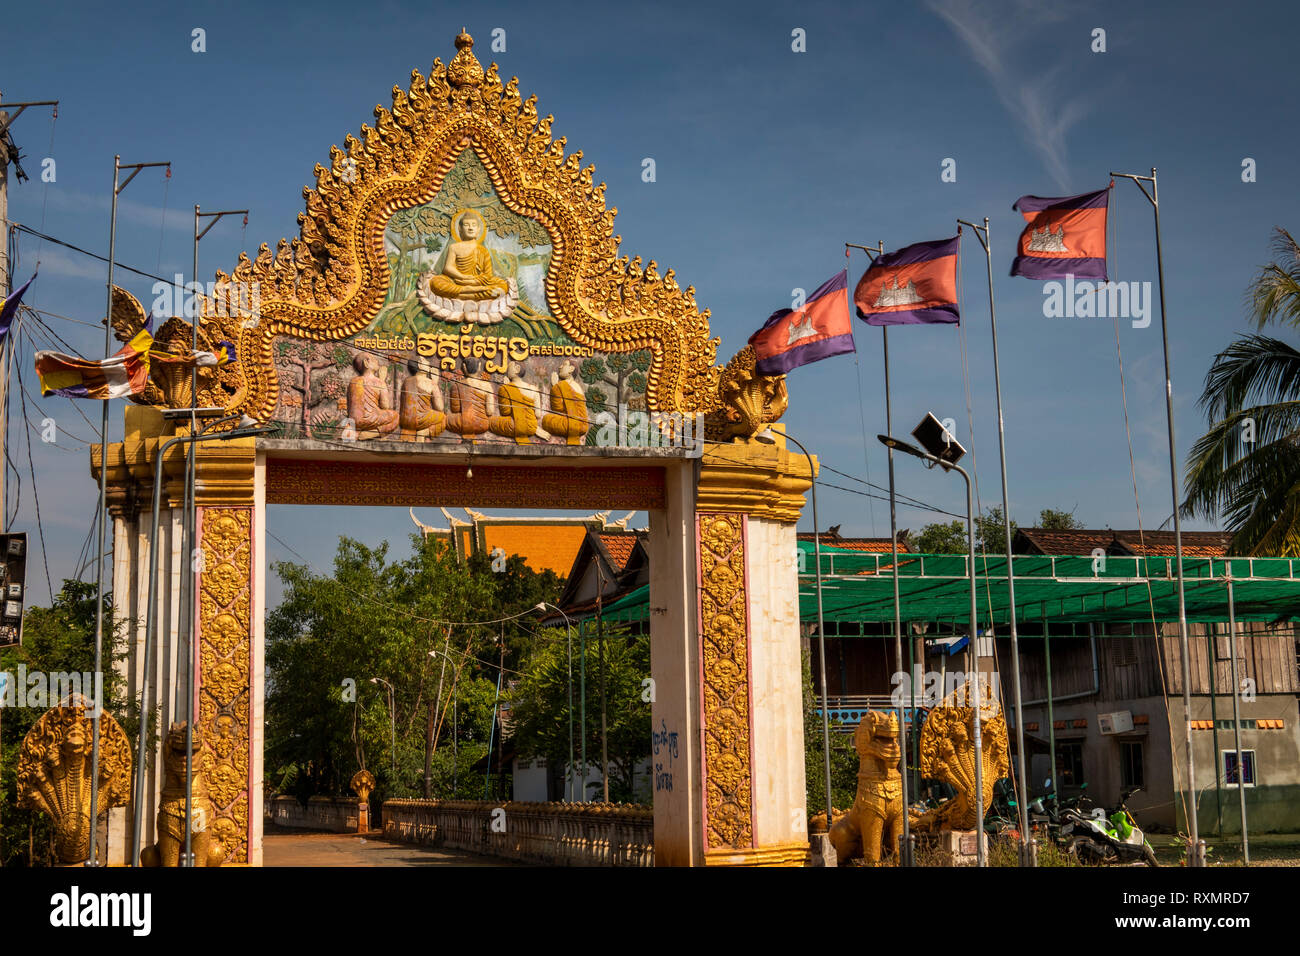 Cambodia, Tboung Khmum Province , Krong Suong, highly decorative entrance gateway to town Wat Stock Photo